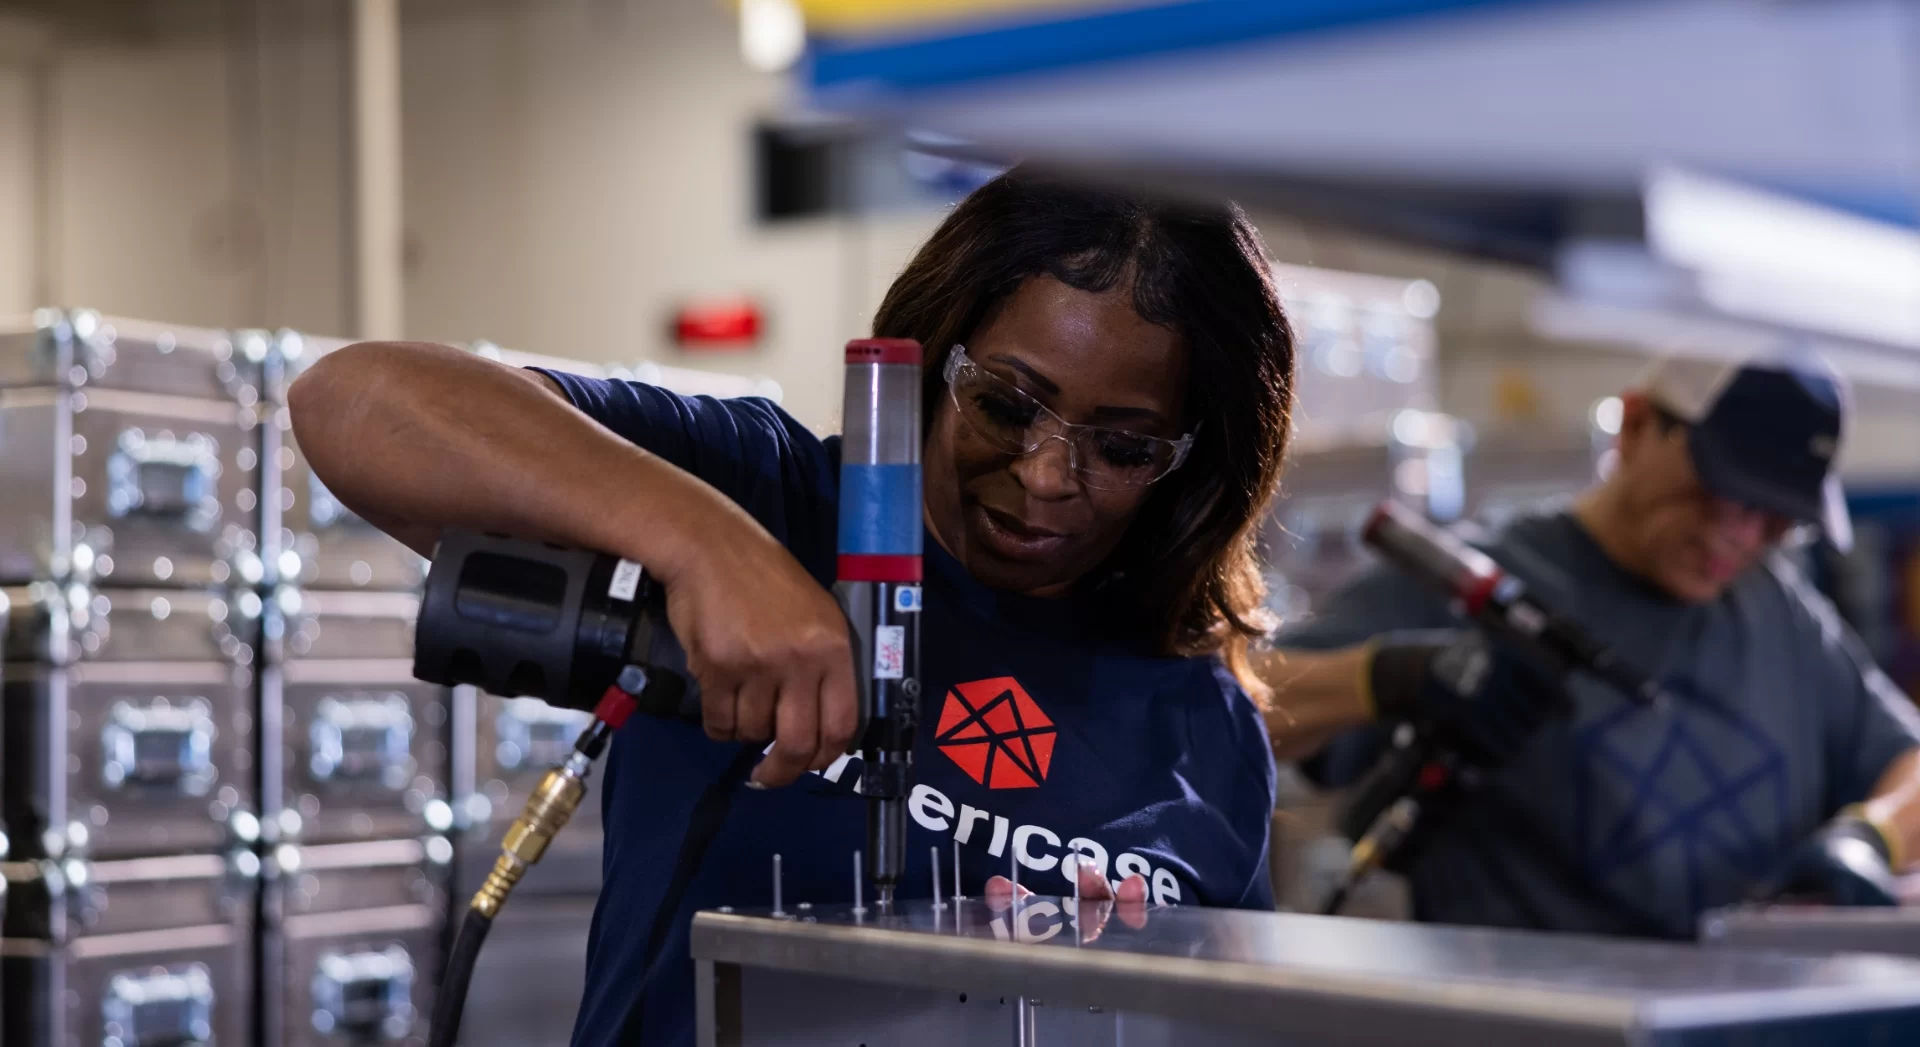 Photo of female Americase employee wearing Amricase apparel and safety glasses drilling a custom case together in the shop.